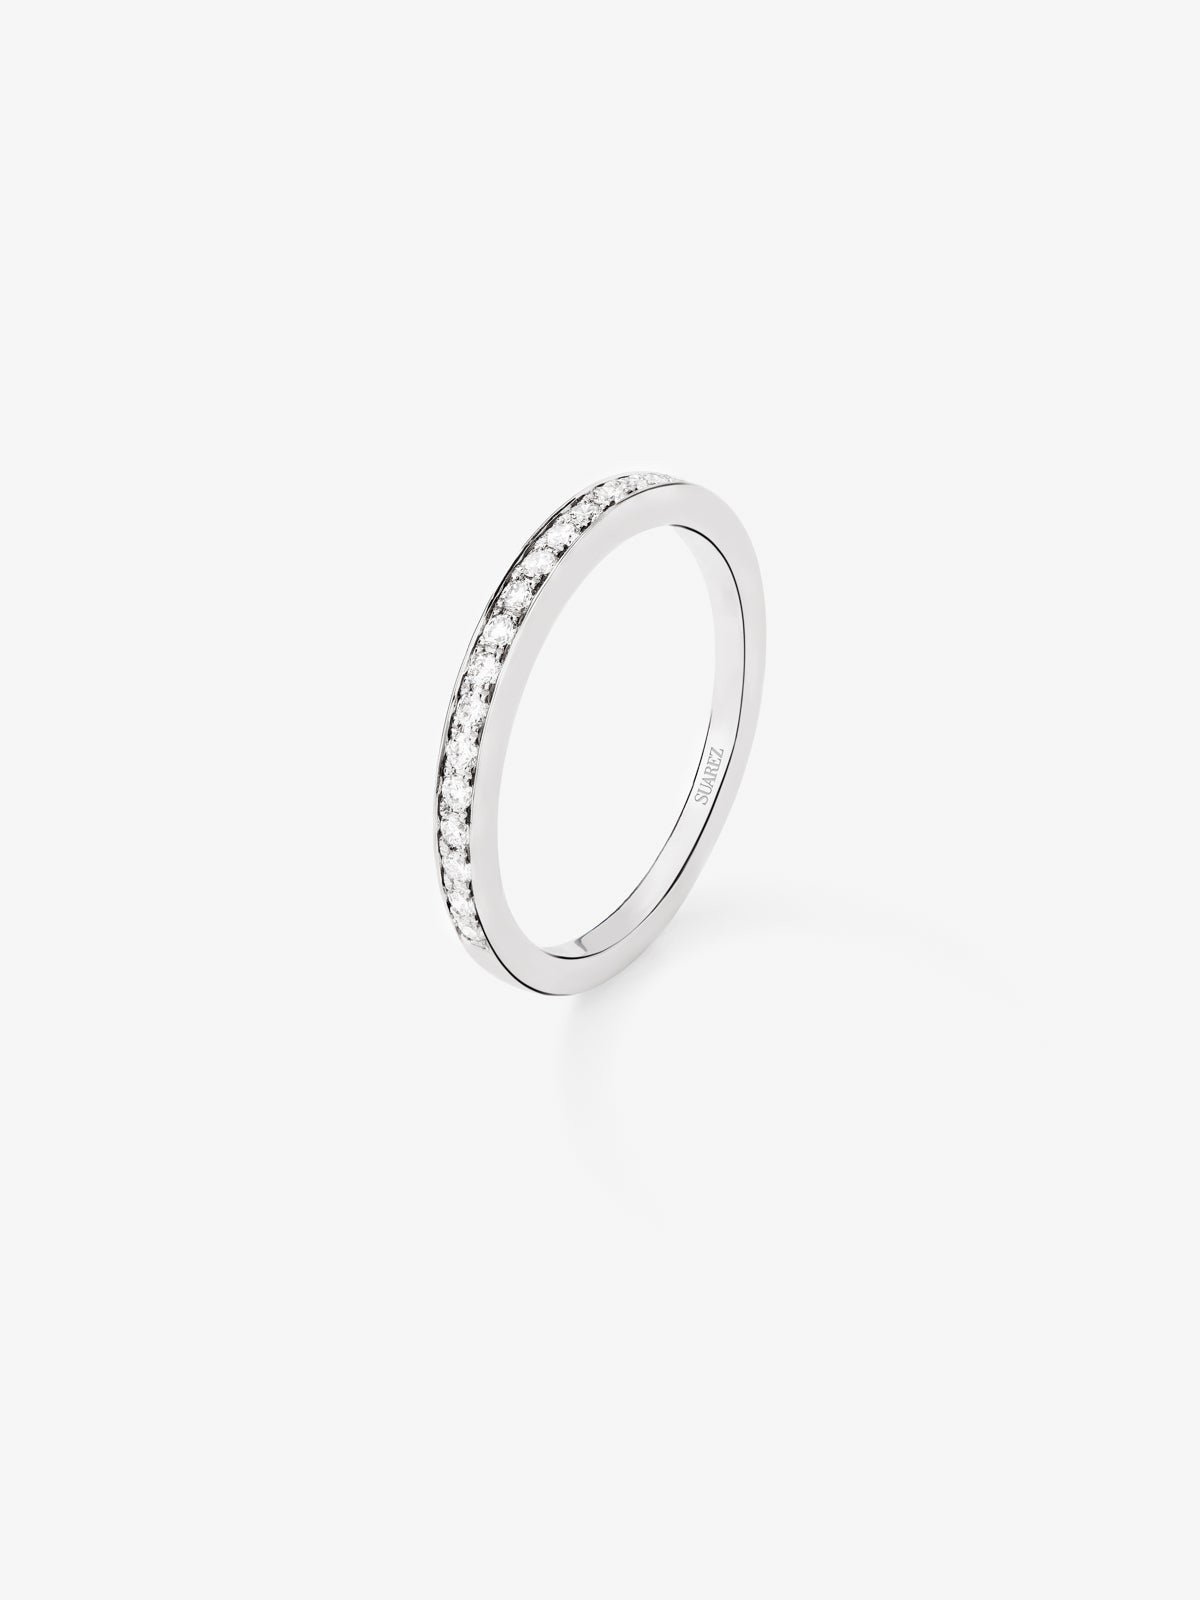 Half ring in 18K white gold with 15 brilliant-cut diamonds with a total of 0.31 cts